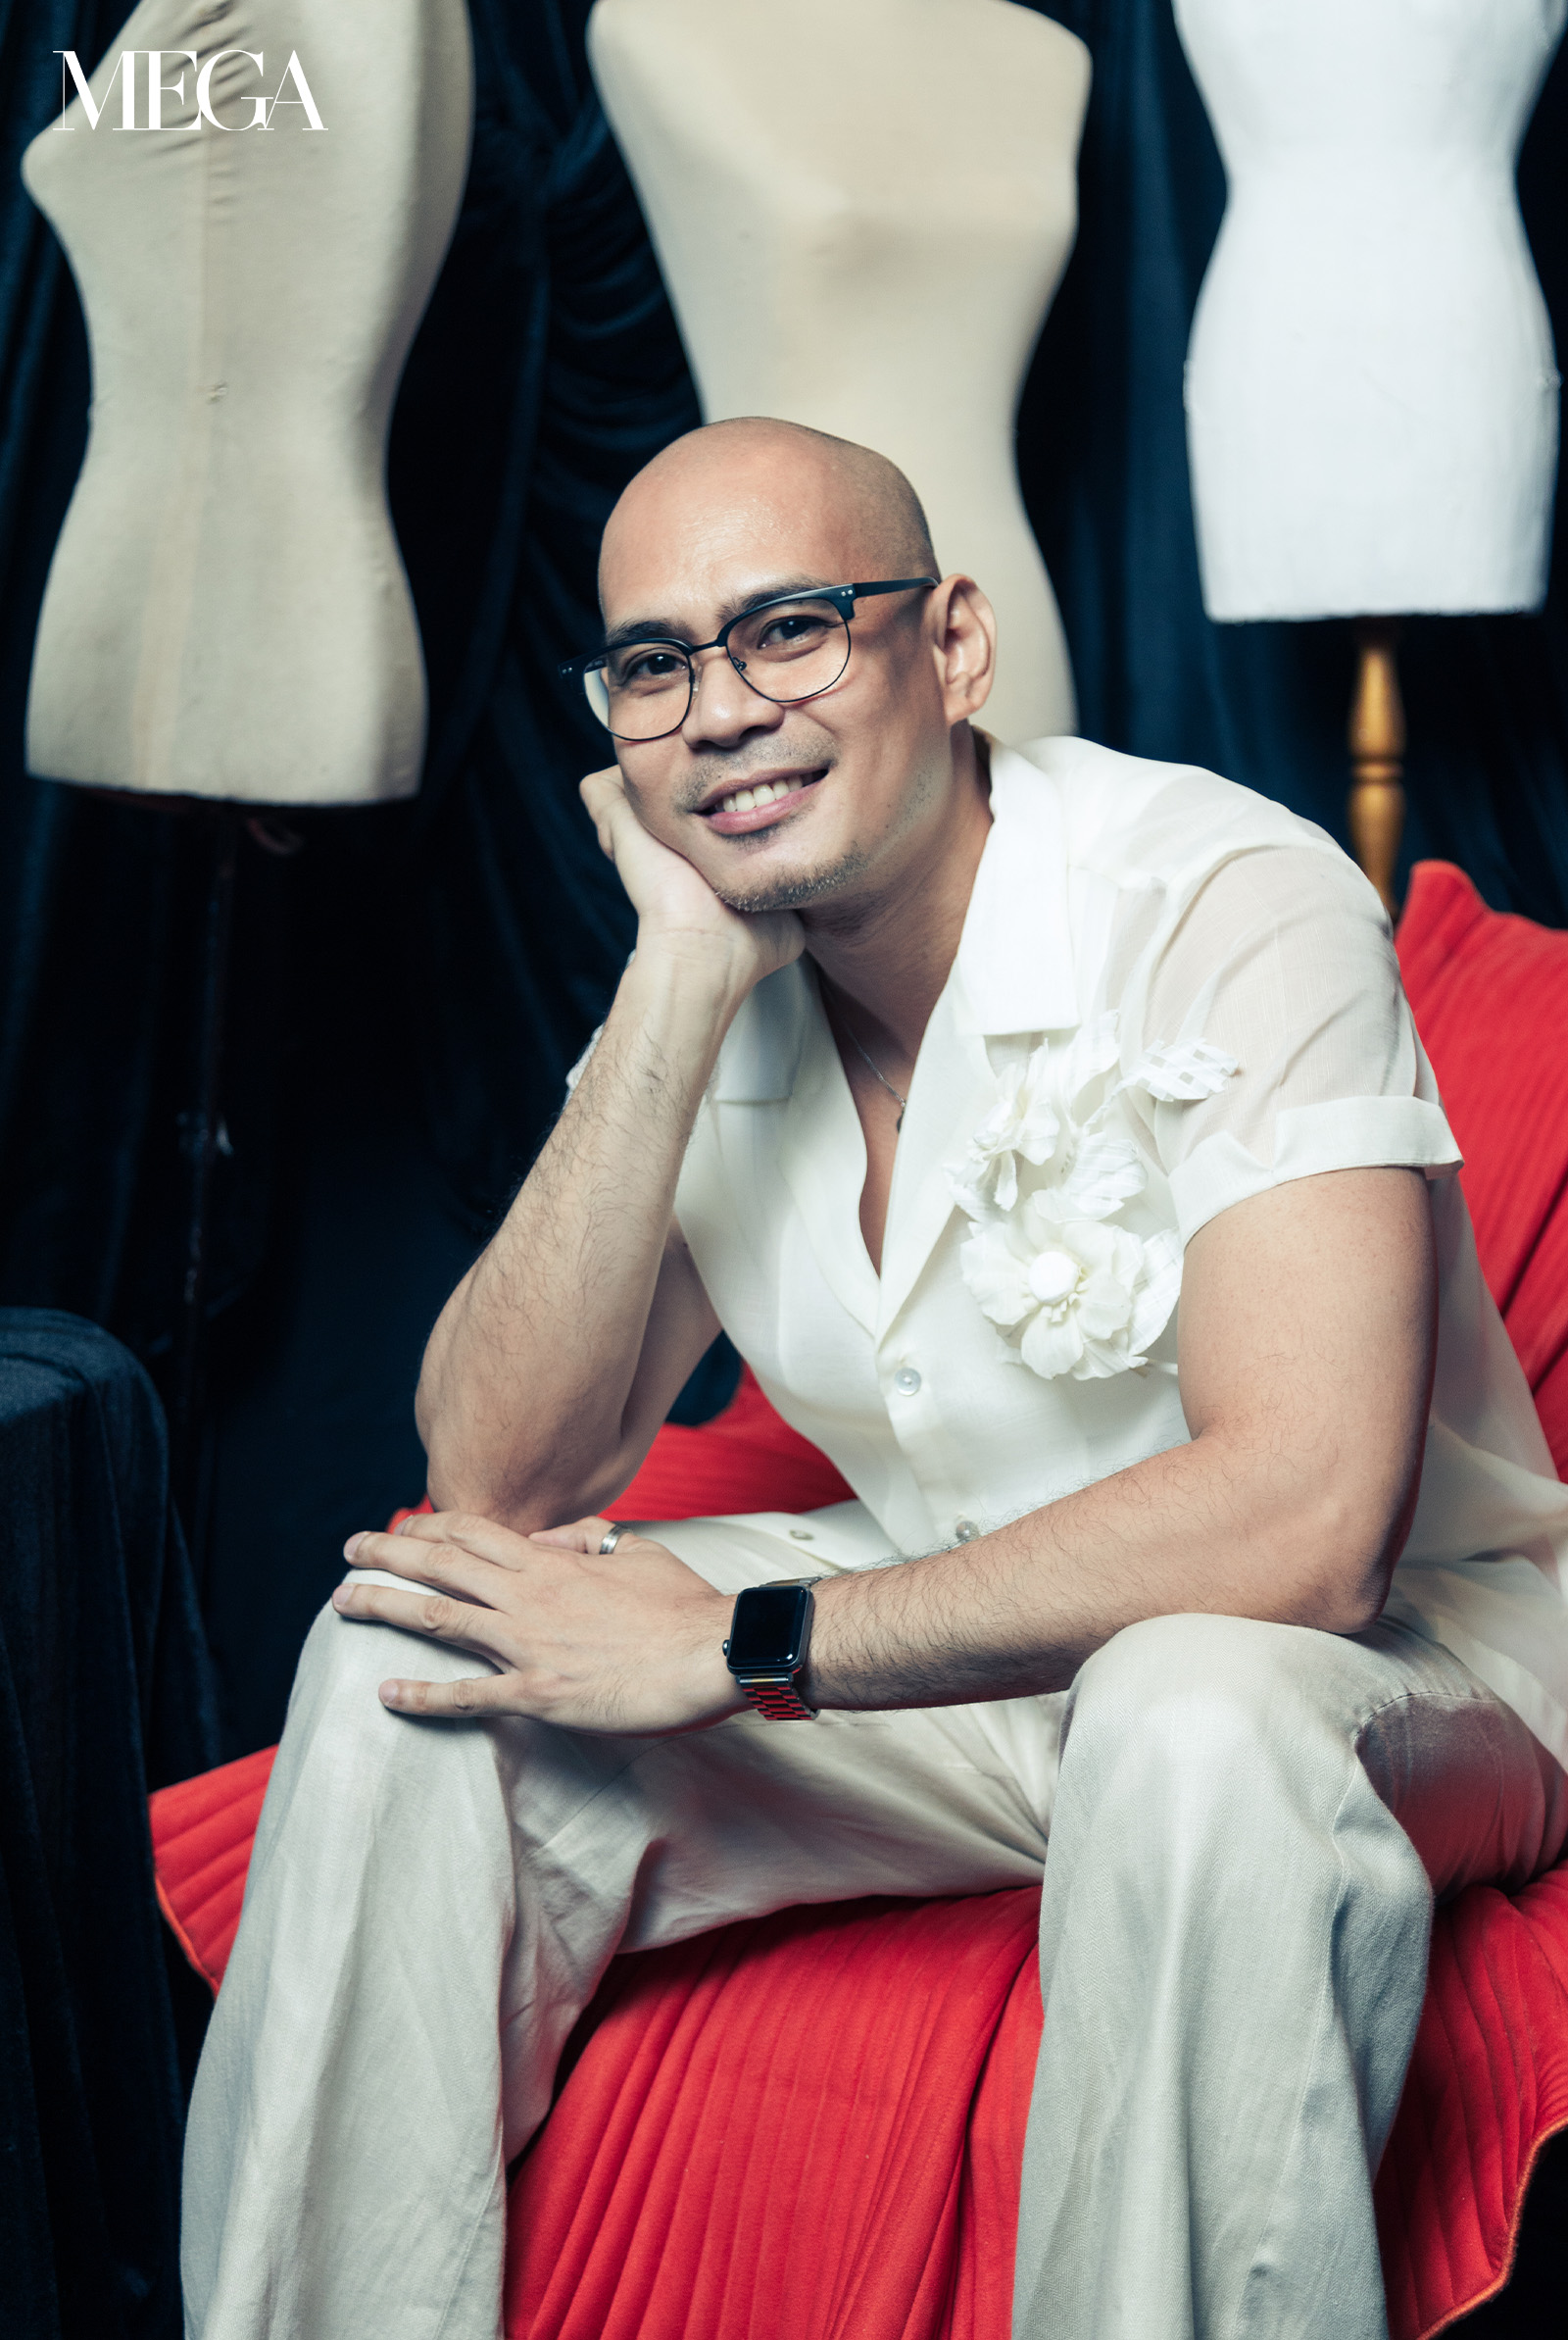 Notable Alumni of the MEGA Young Designers Competition CHRIS DIAZ